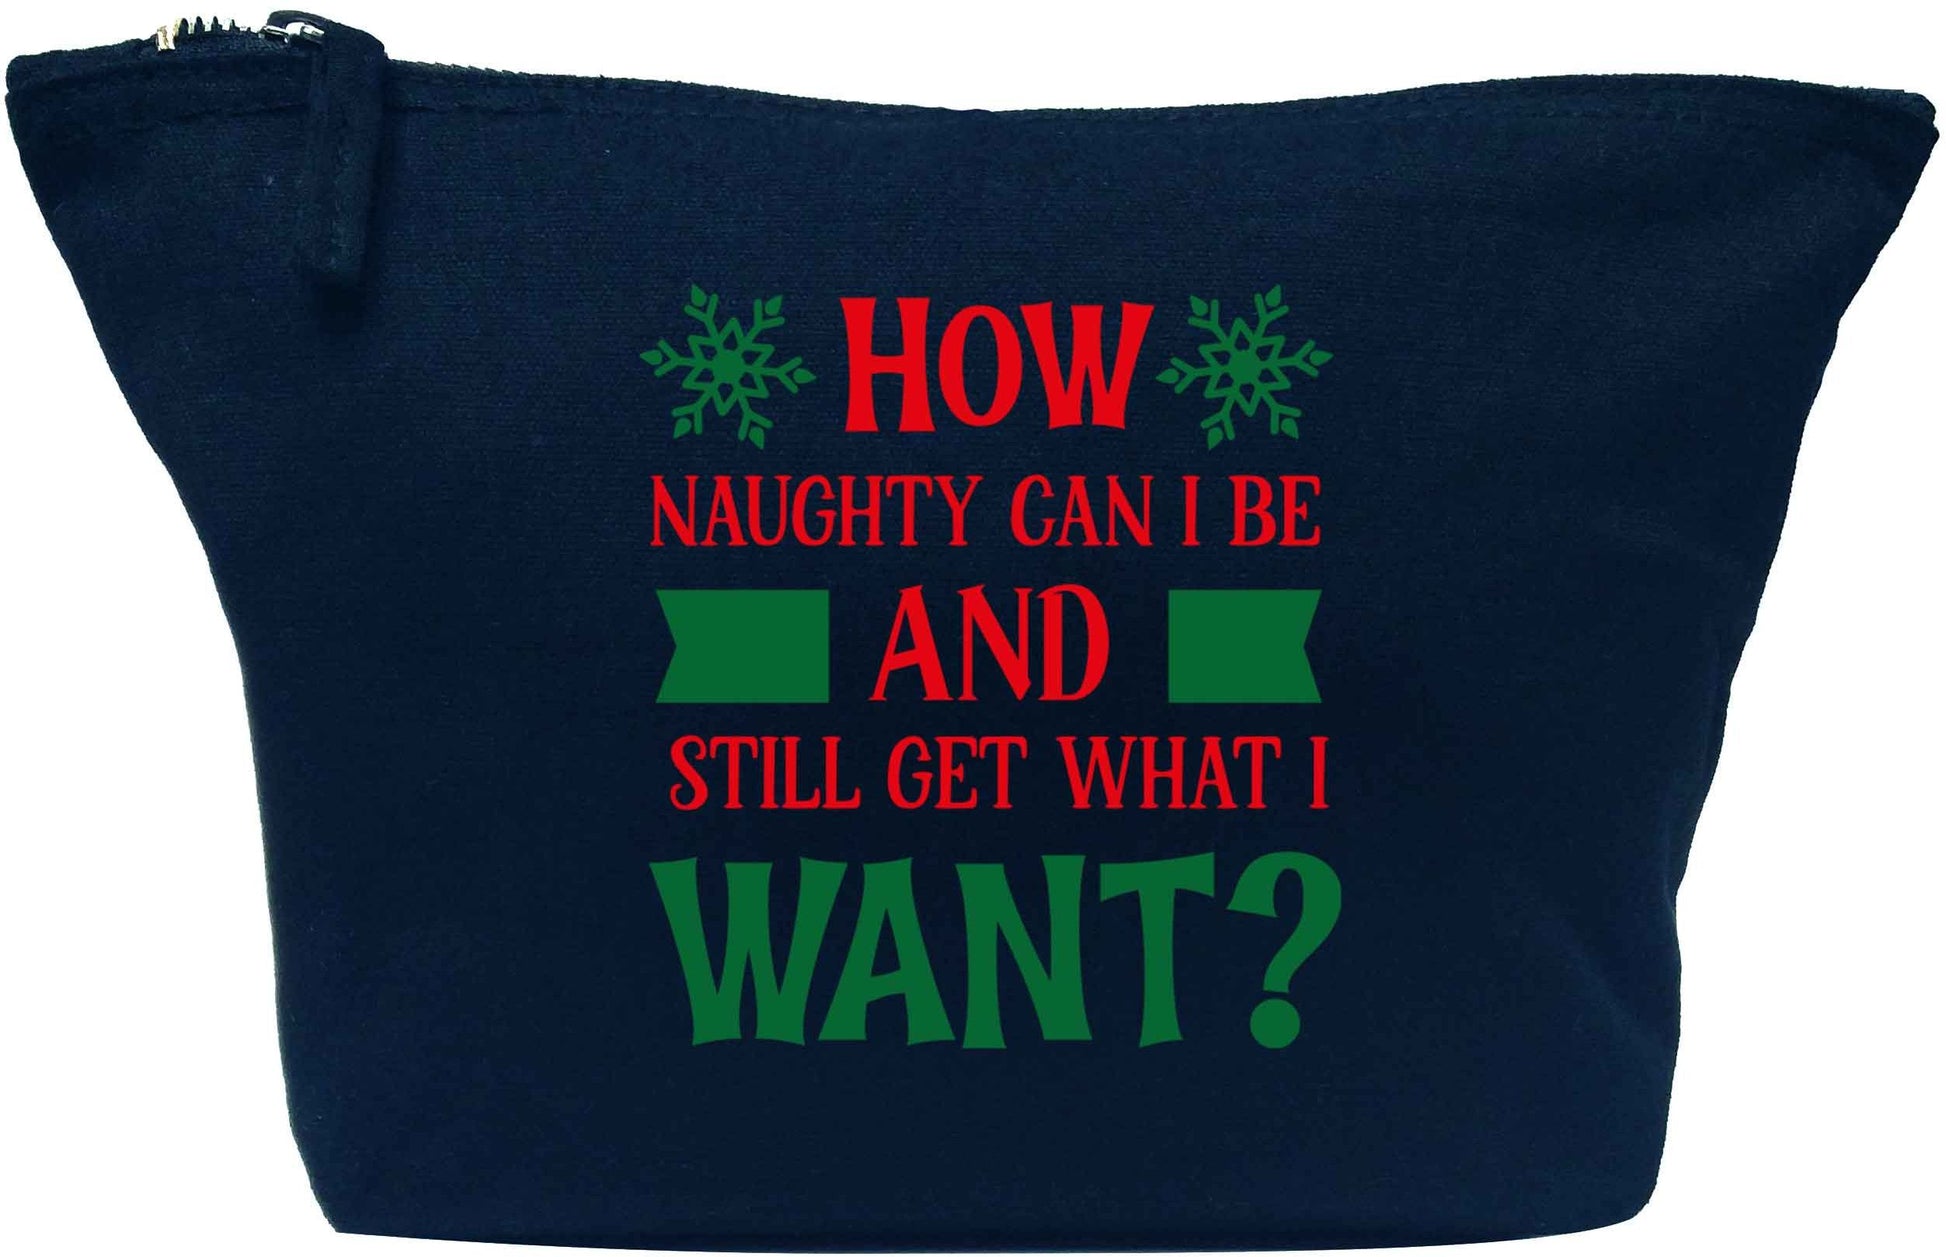 How naughty can I be and still get what I want? navy makeup bag